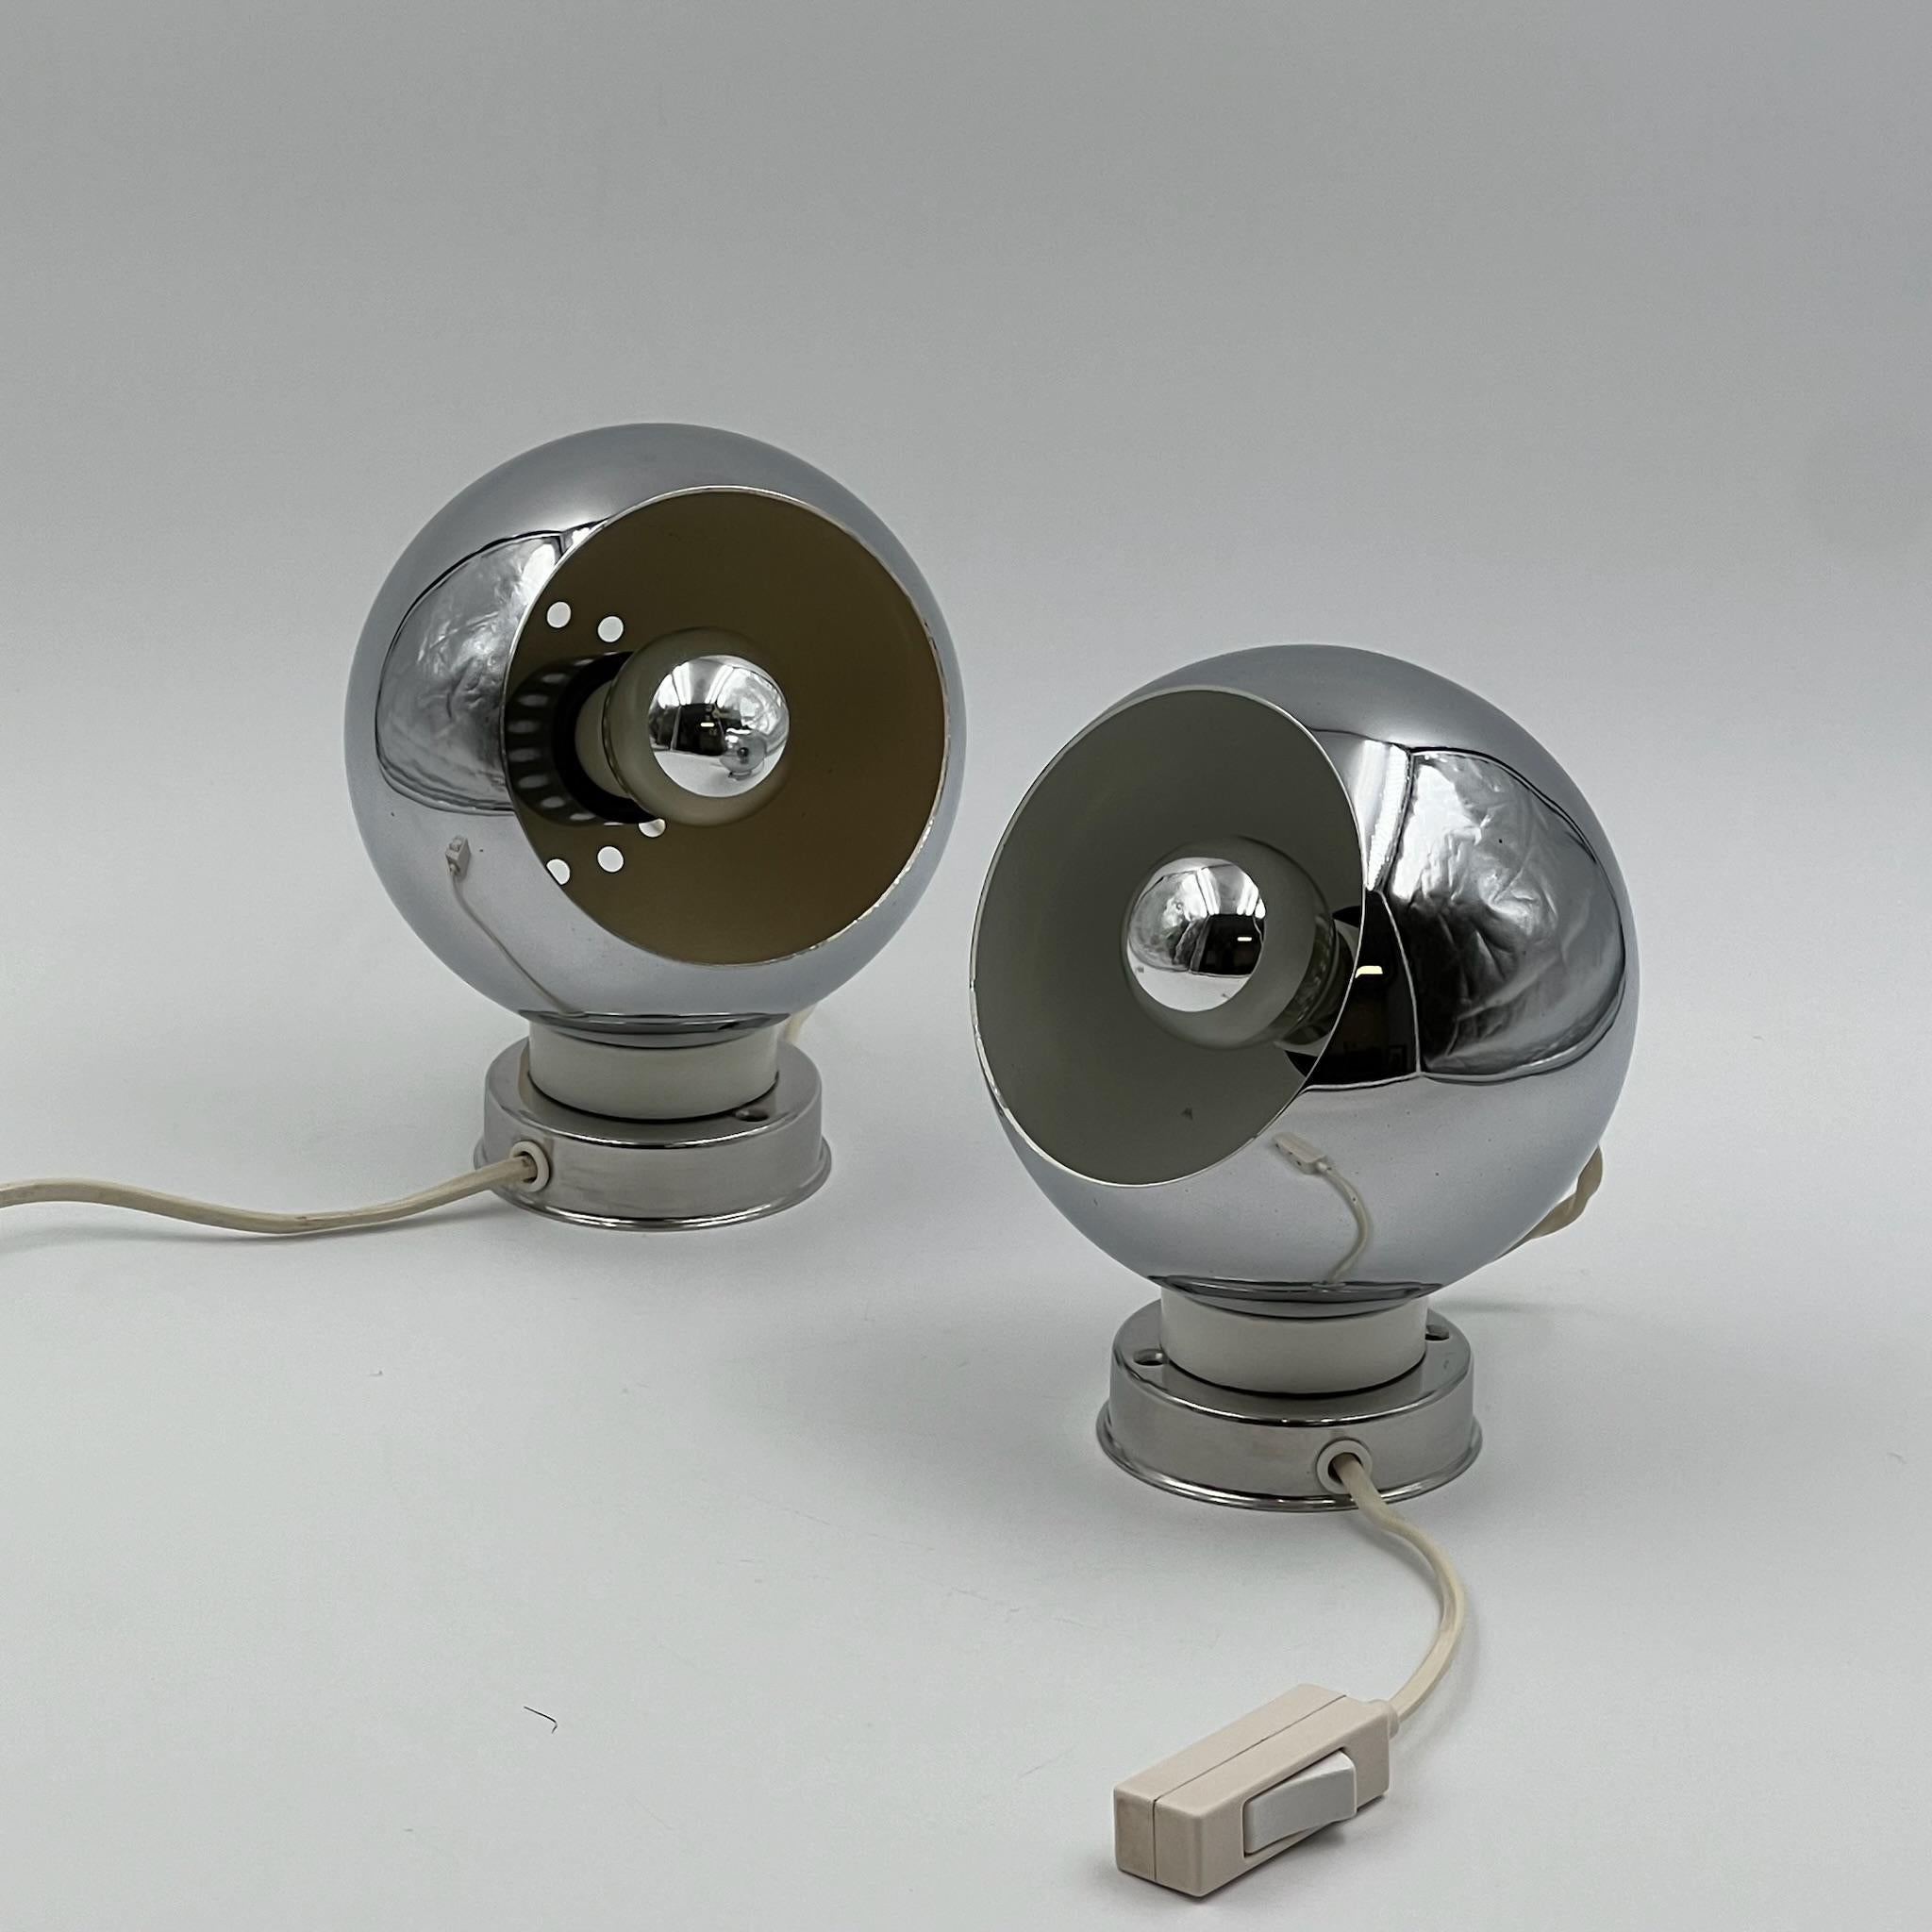 Space Age Iconic Reggiani 'Eyeball' Lamps 60s - Pair of Vintage Masterpieces - Set of 2 For Sale